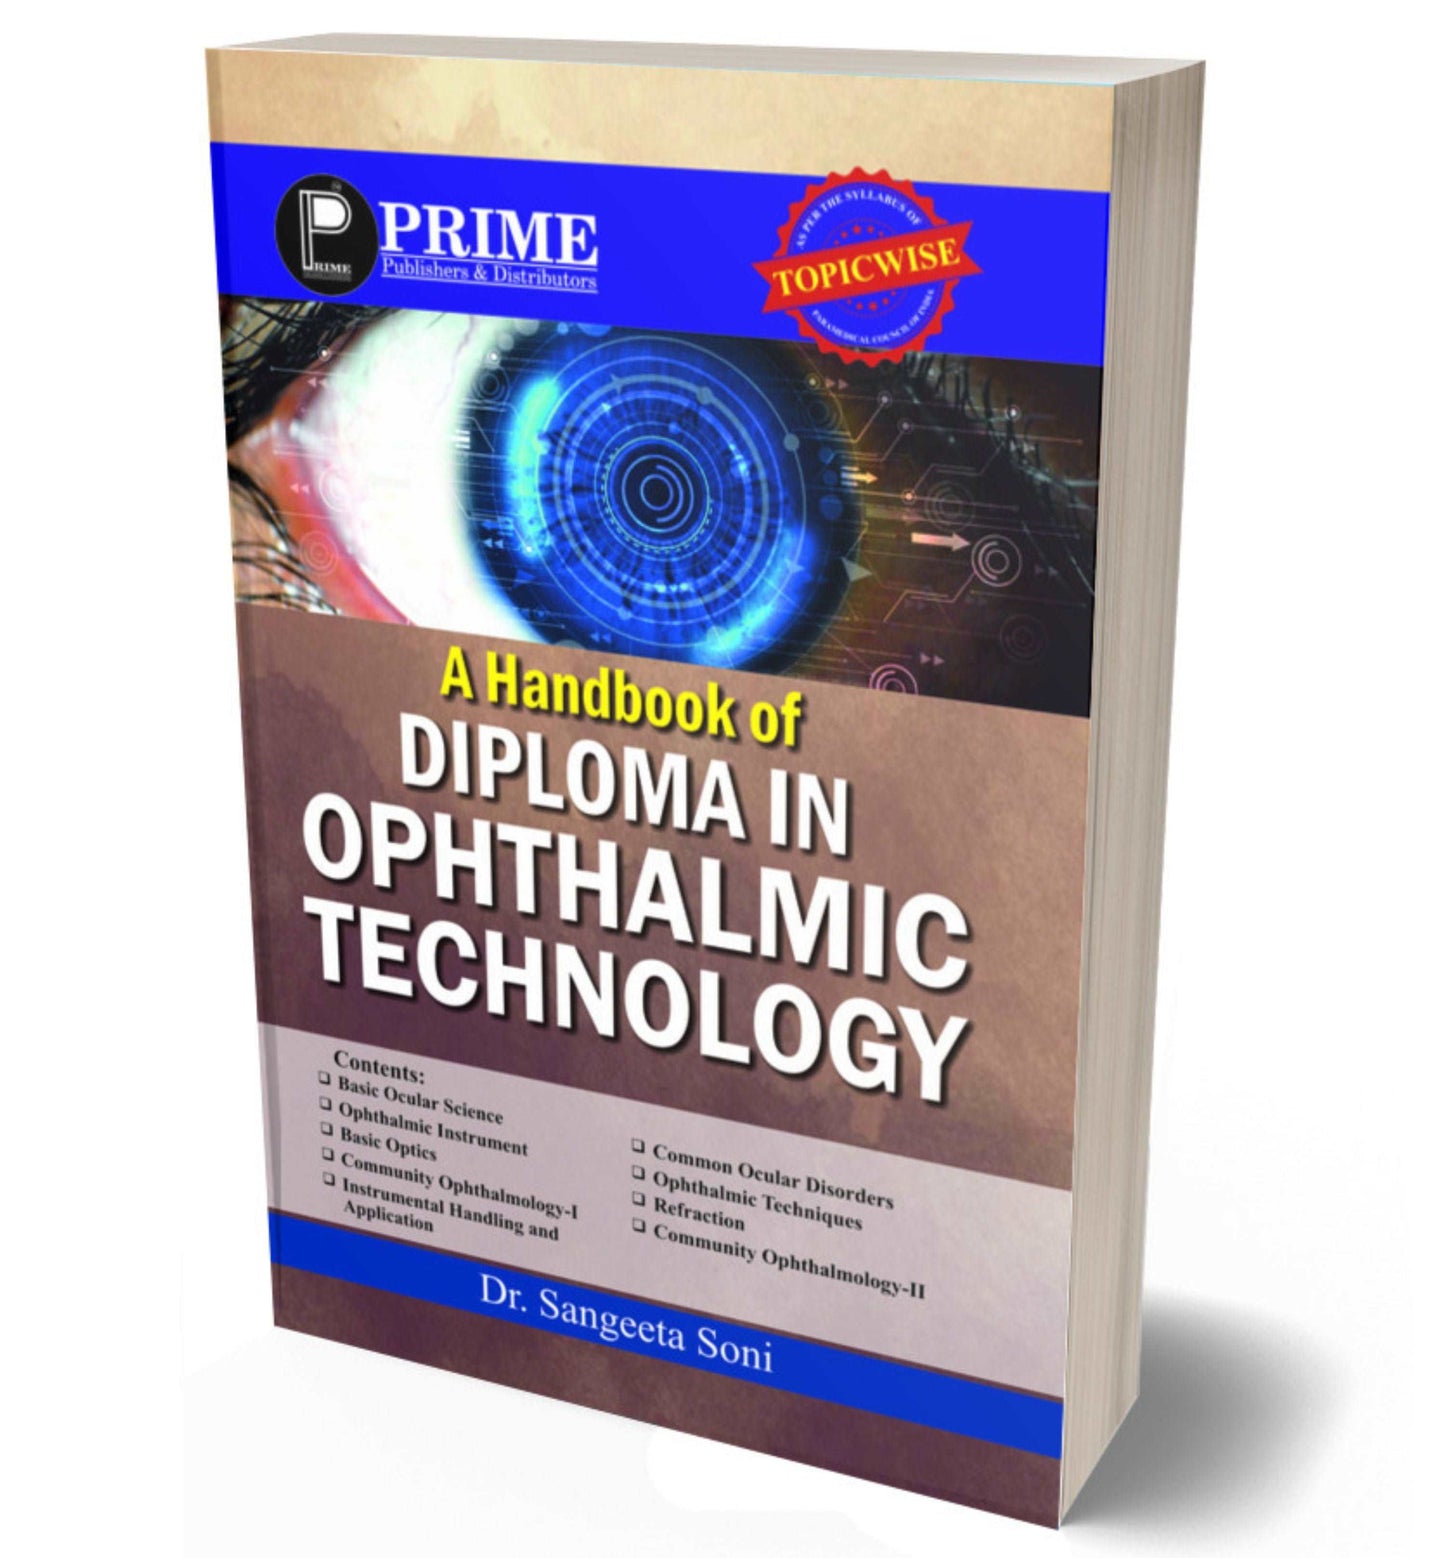 A handbook of Diploma in Ophthalmic Technology